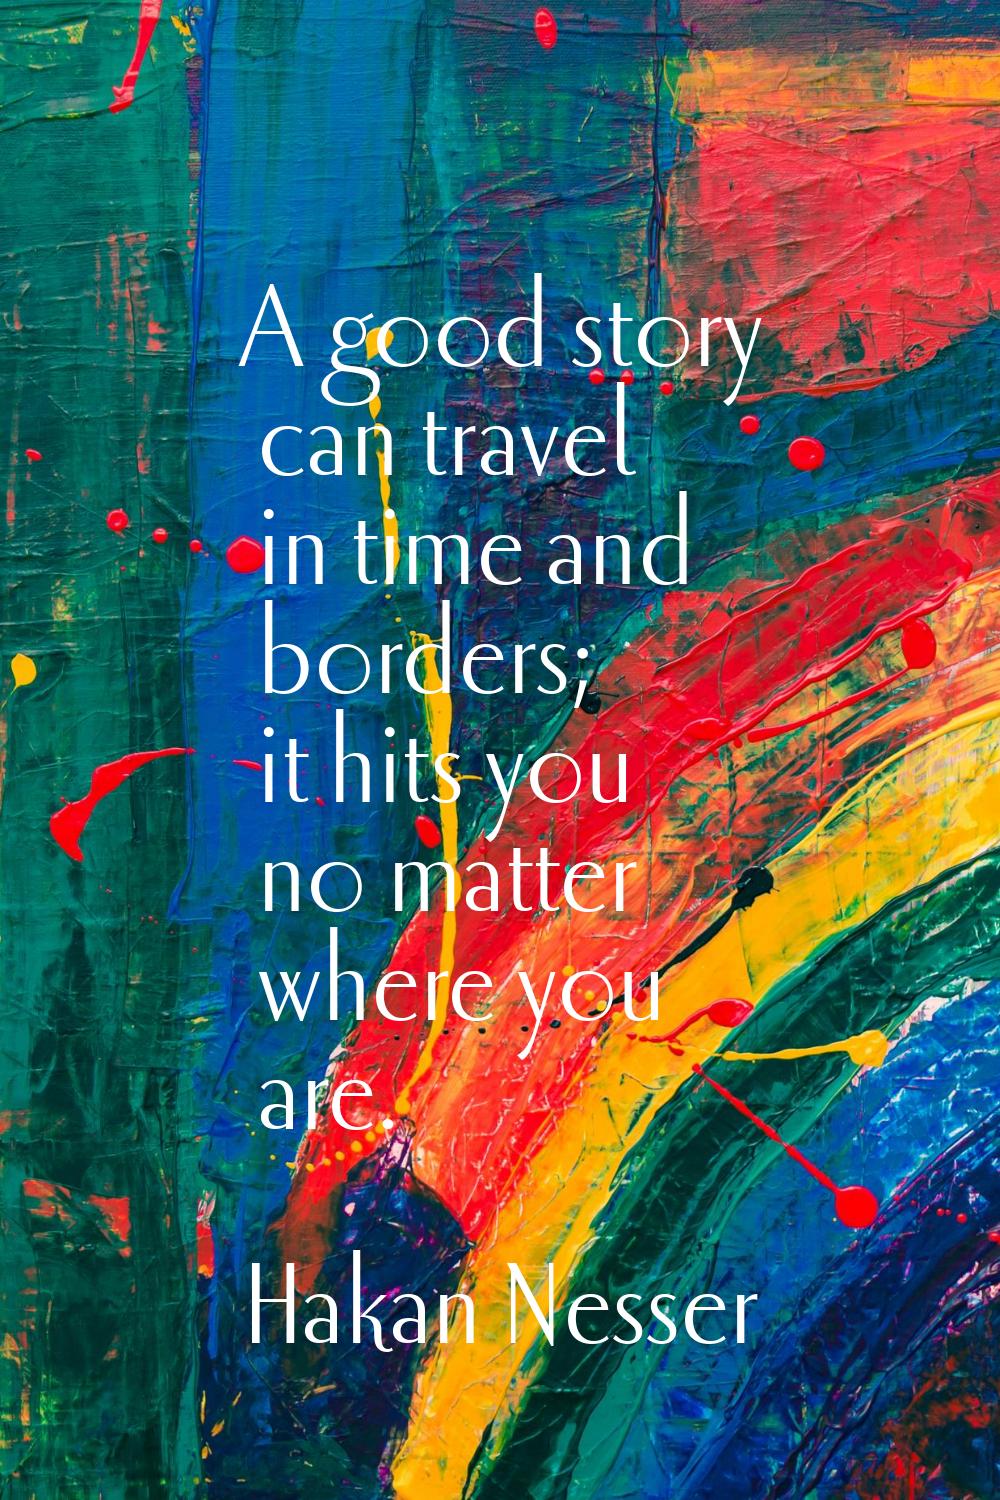 A good story can travel in time and borders; it hits you no matter where you are.